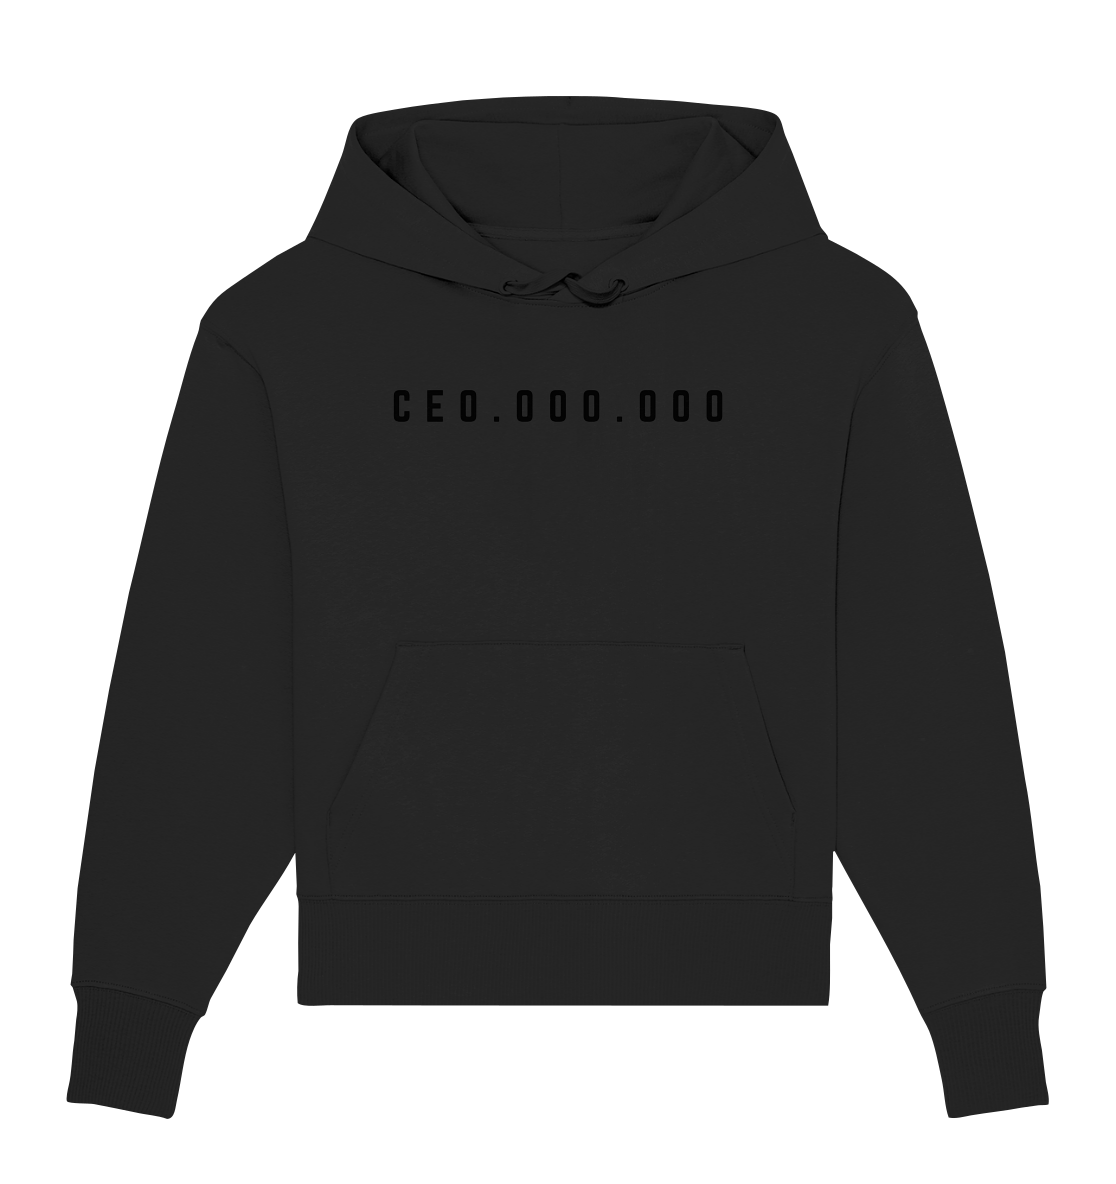 CEO.OOO.OOO COLLECTION by LIMITLOS - Organic Oversize Hoodie